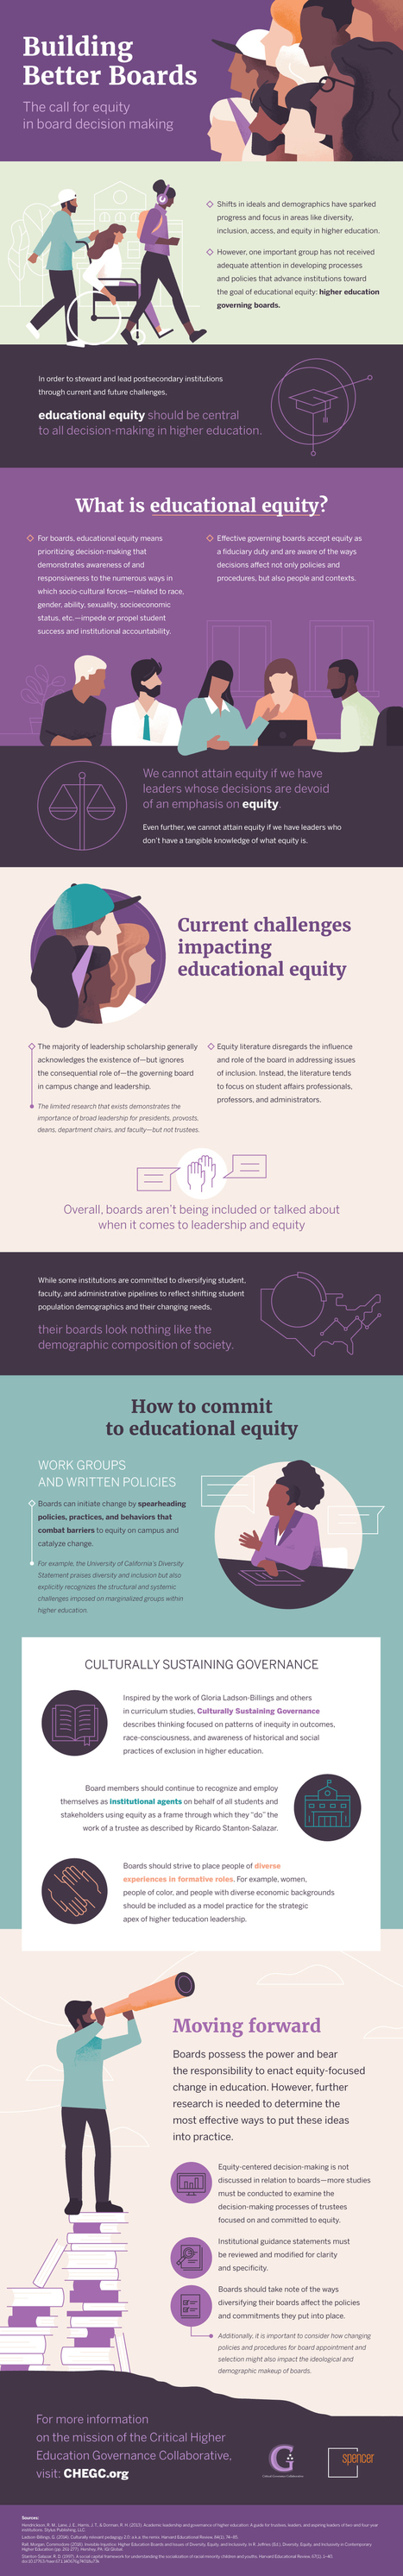 Building Better Boards: The Call for Equity in Board Decision Making - #Infographics | Digital Delights - Digital Tribes | Scoop.it